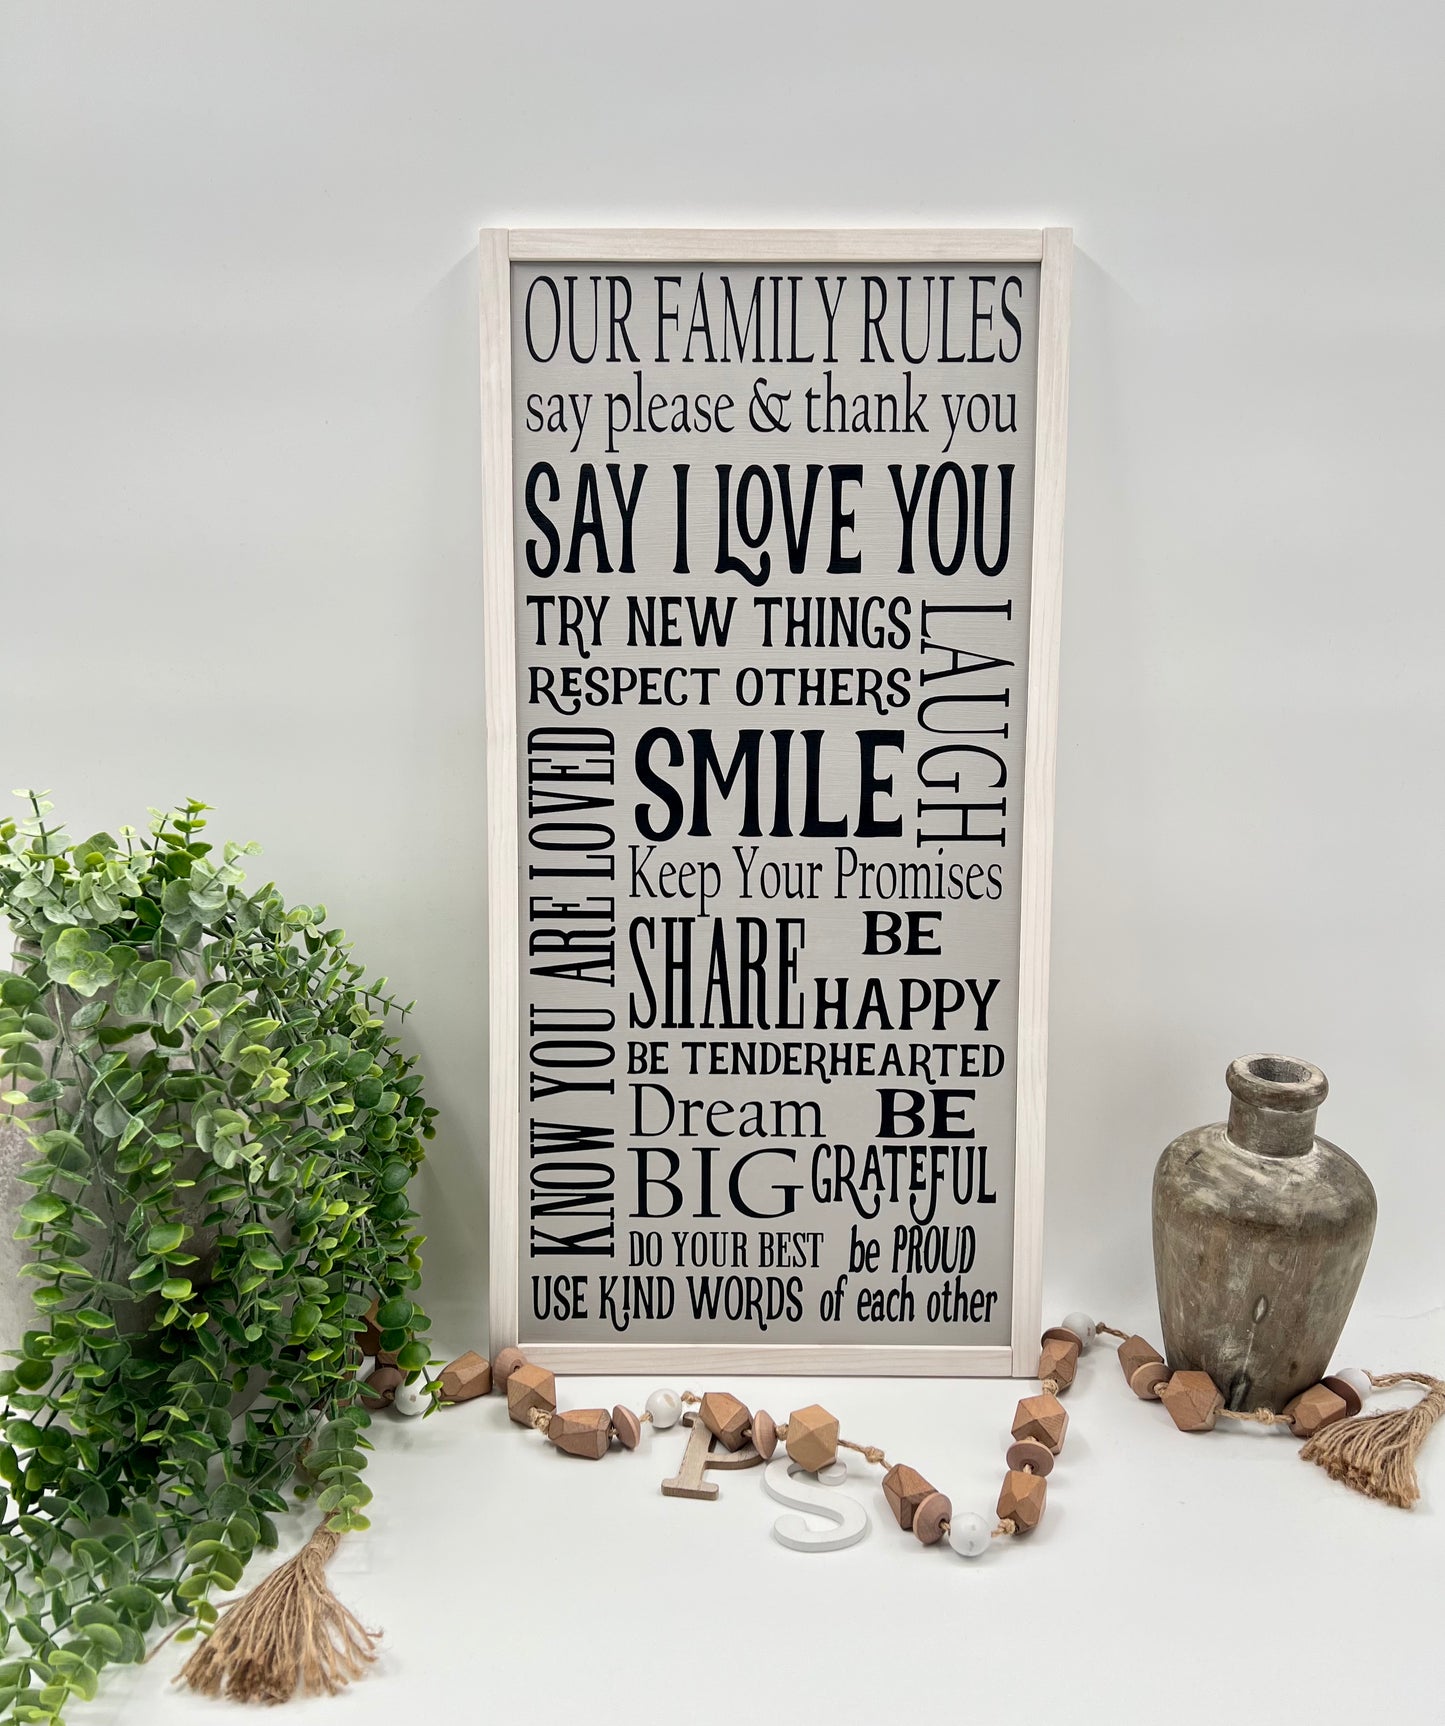 Our Family Rules - 12x24” Wood Sign